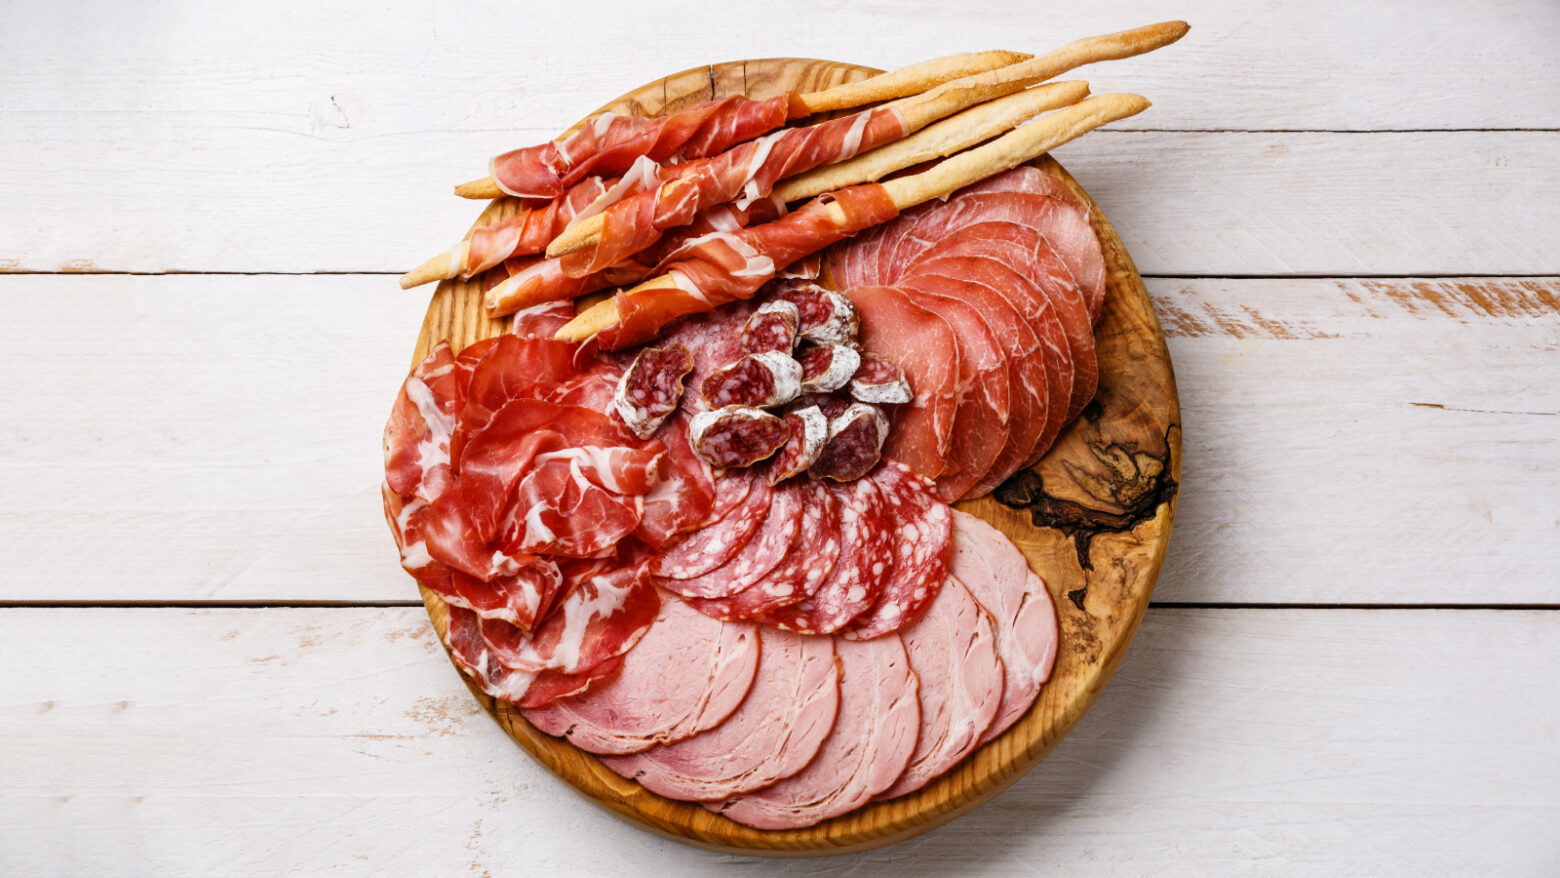 Above shot of different cuts of deli meats and salamis on a circular wooden board